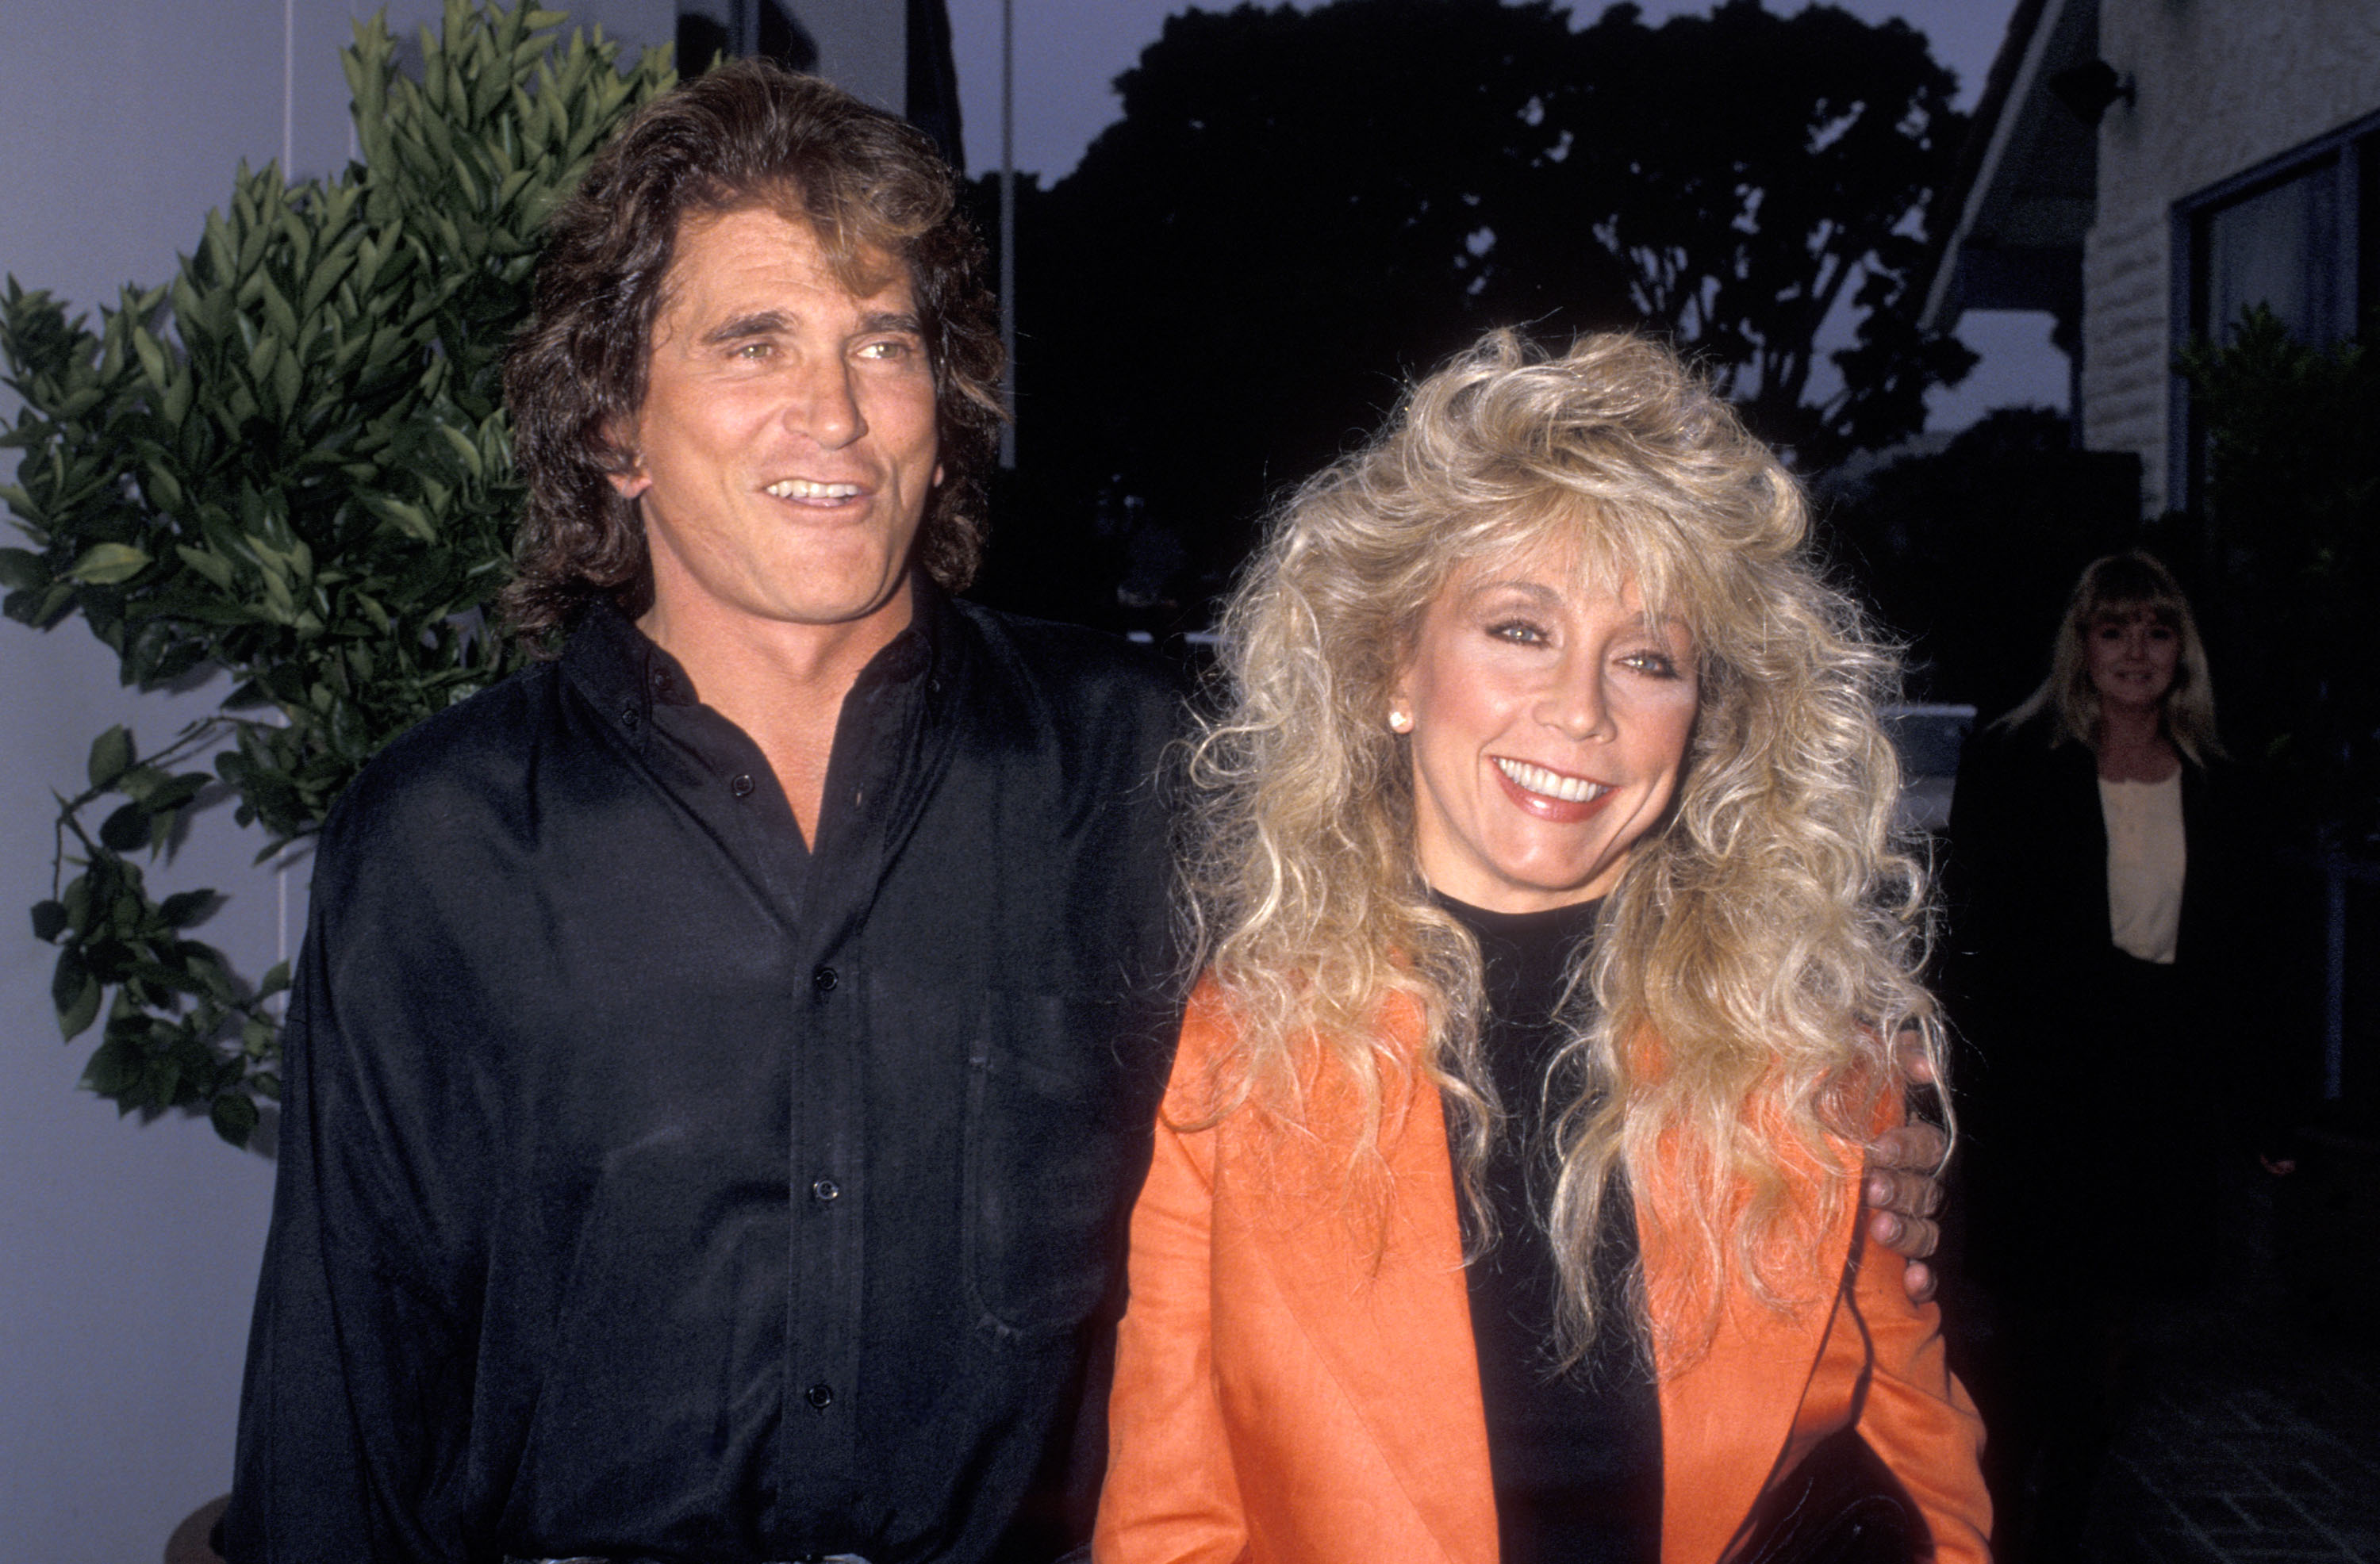 Michael Landon and wife Cindy Landon in 1989 